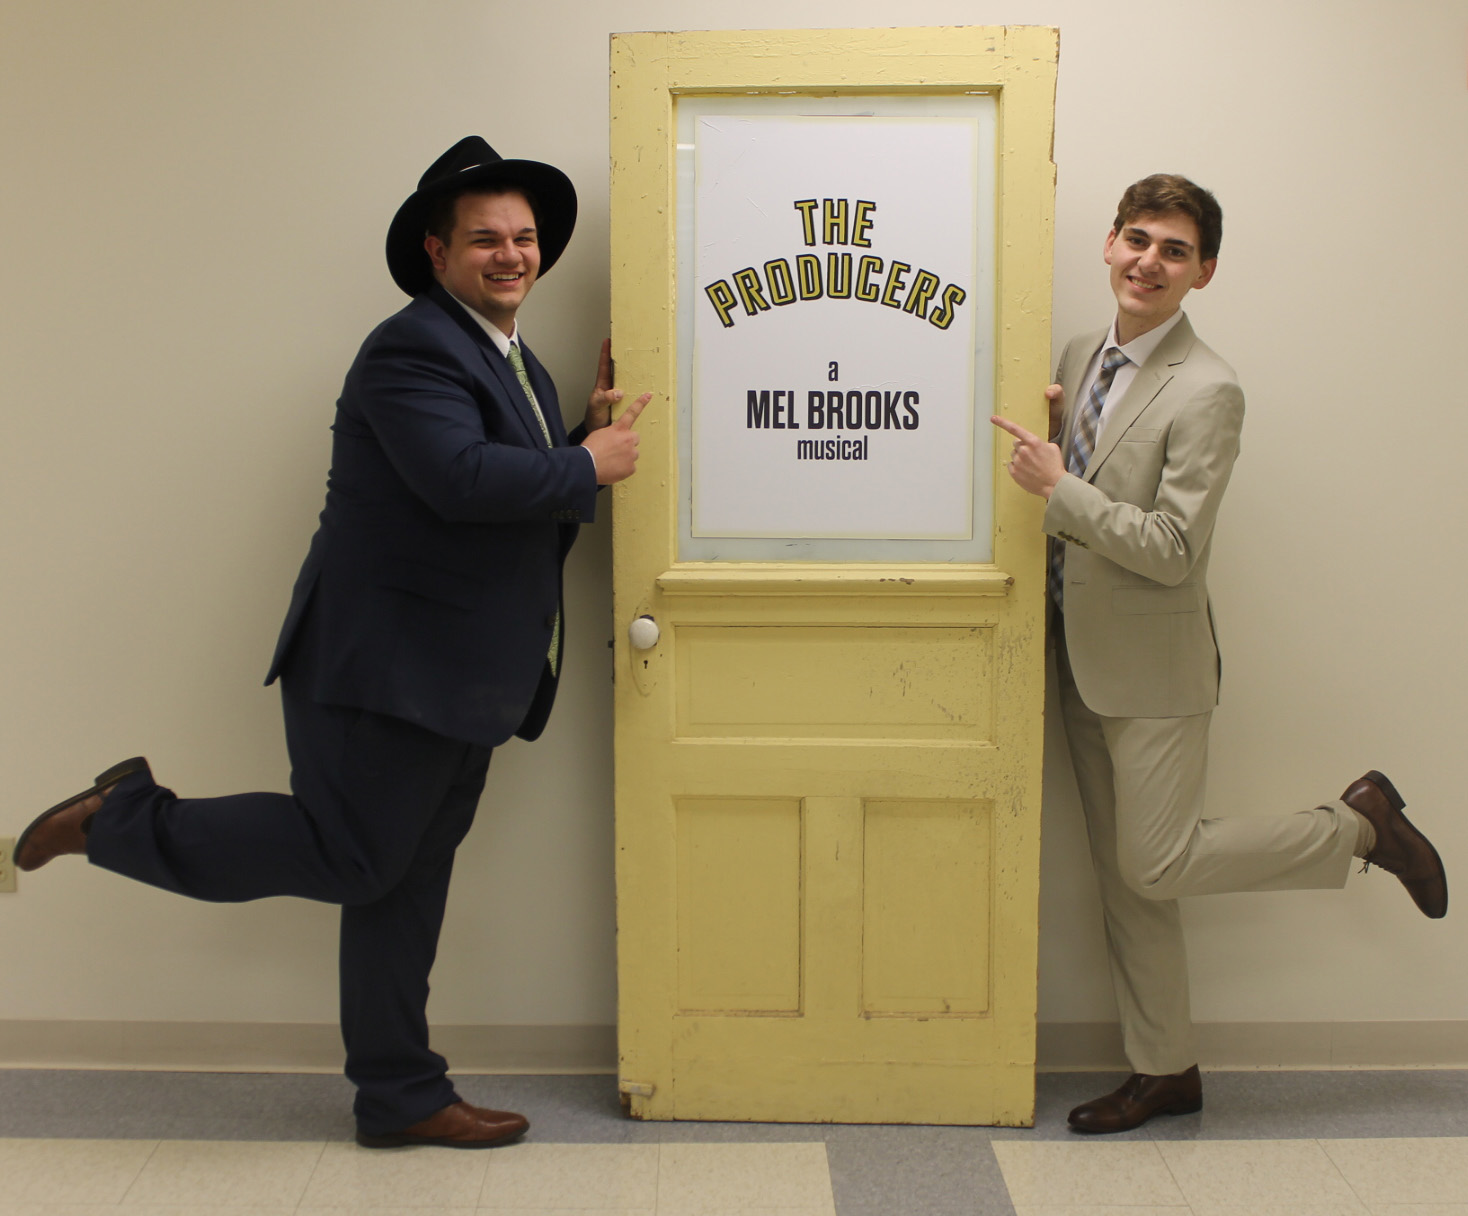 Alex McRoy of Harrisburg (left) plays Max and Jordan Richey of Benton plays Leo, the main characters in The Producers at SIC April 20-22. Reserved tickets are on sale now.